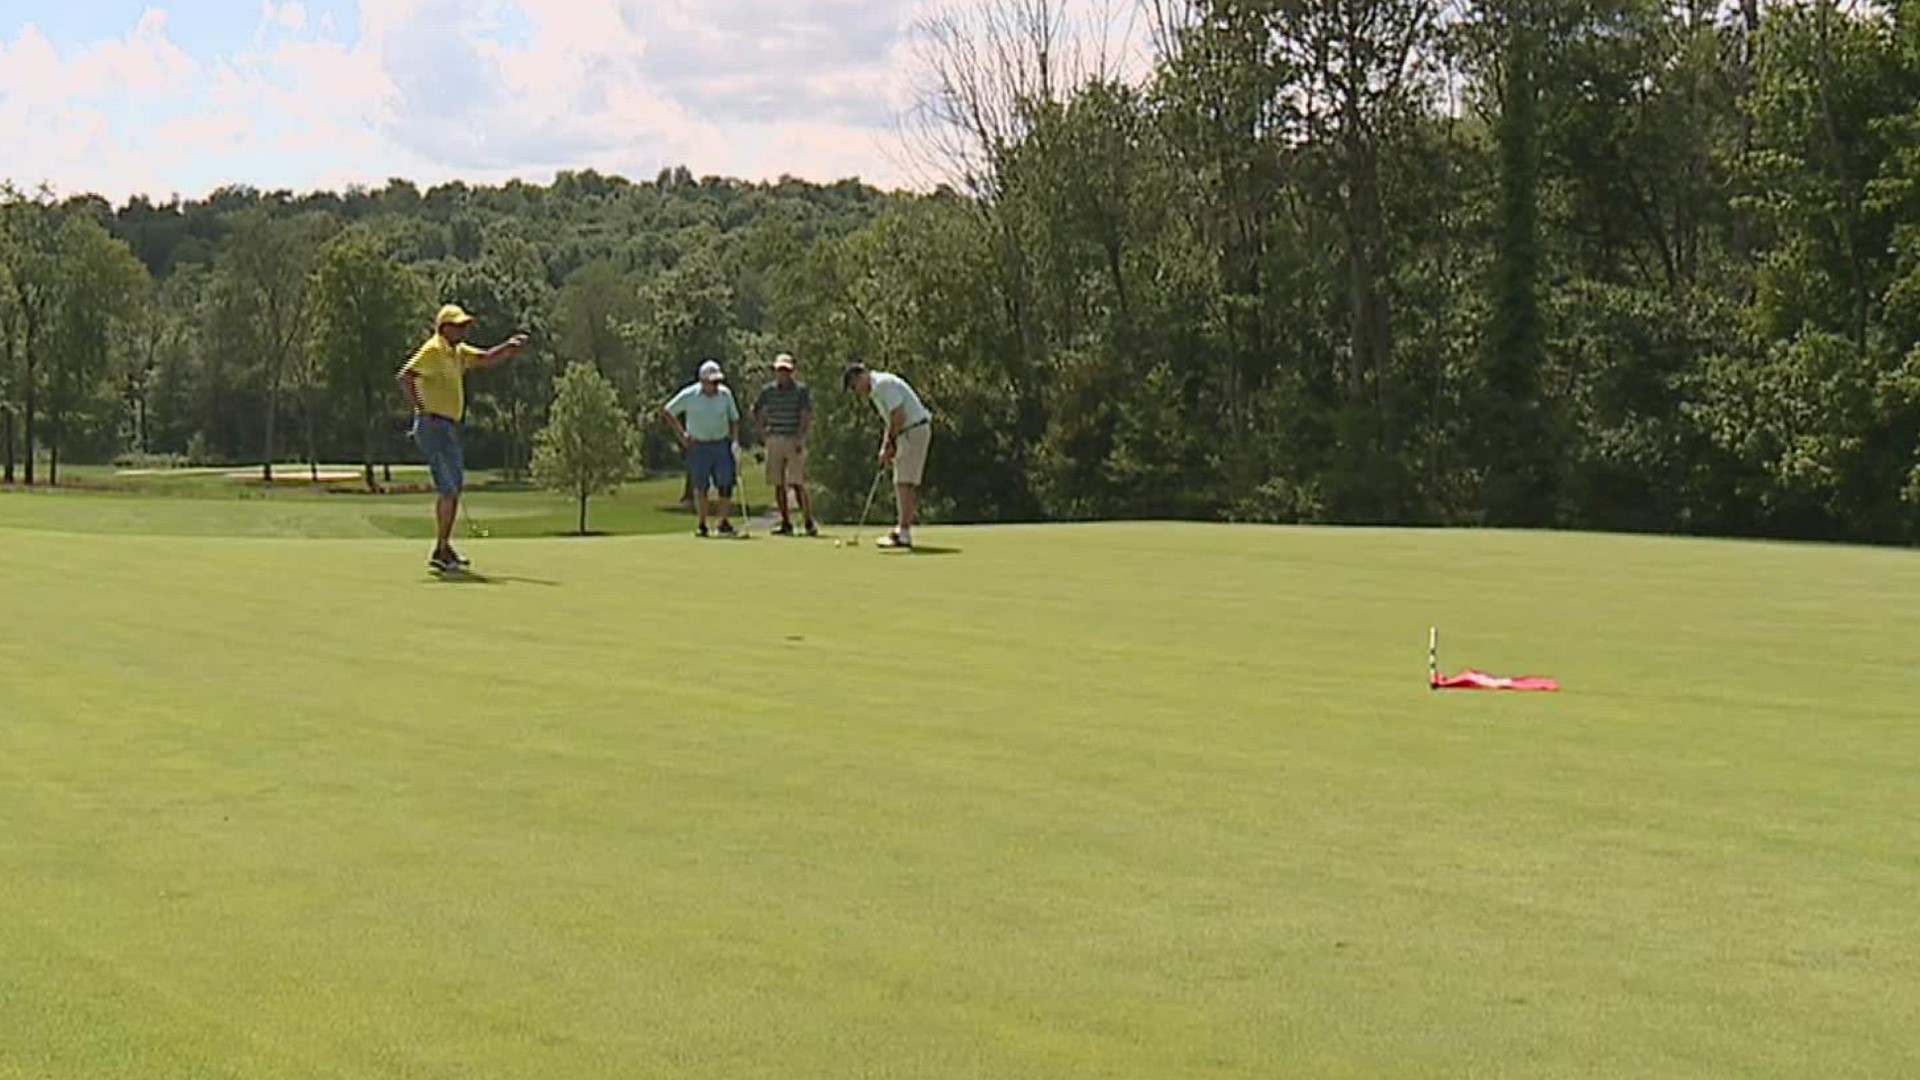 Golfing, charity, and an old friend – that's what played out at a country club in Lackawanna County on Monday.